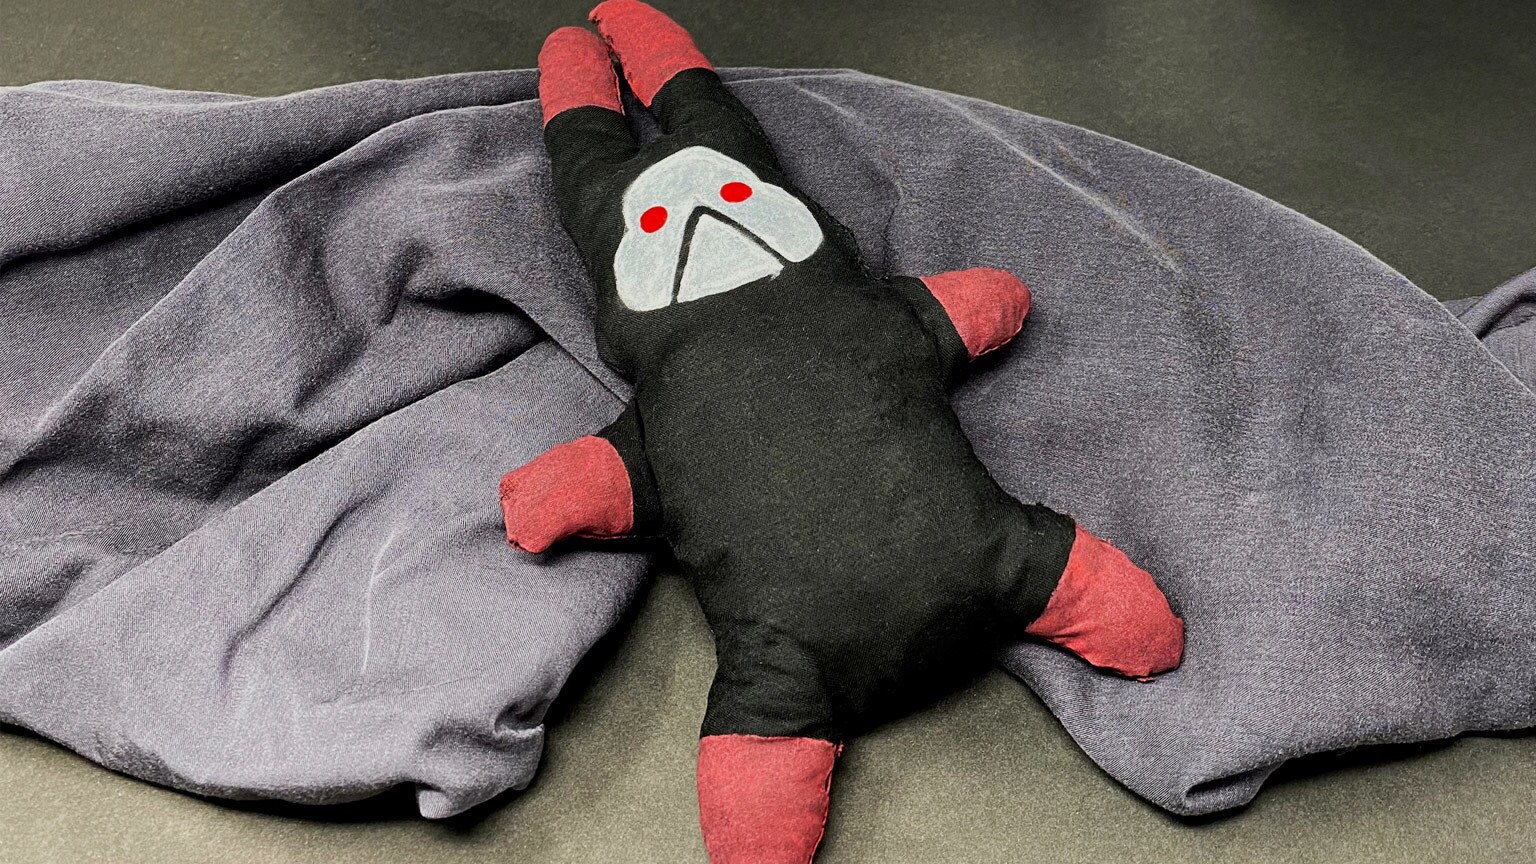 Make Your Space Cozy with a DIY Bad Batch Lula Doll